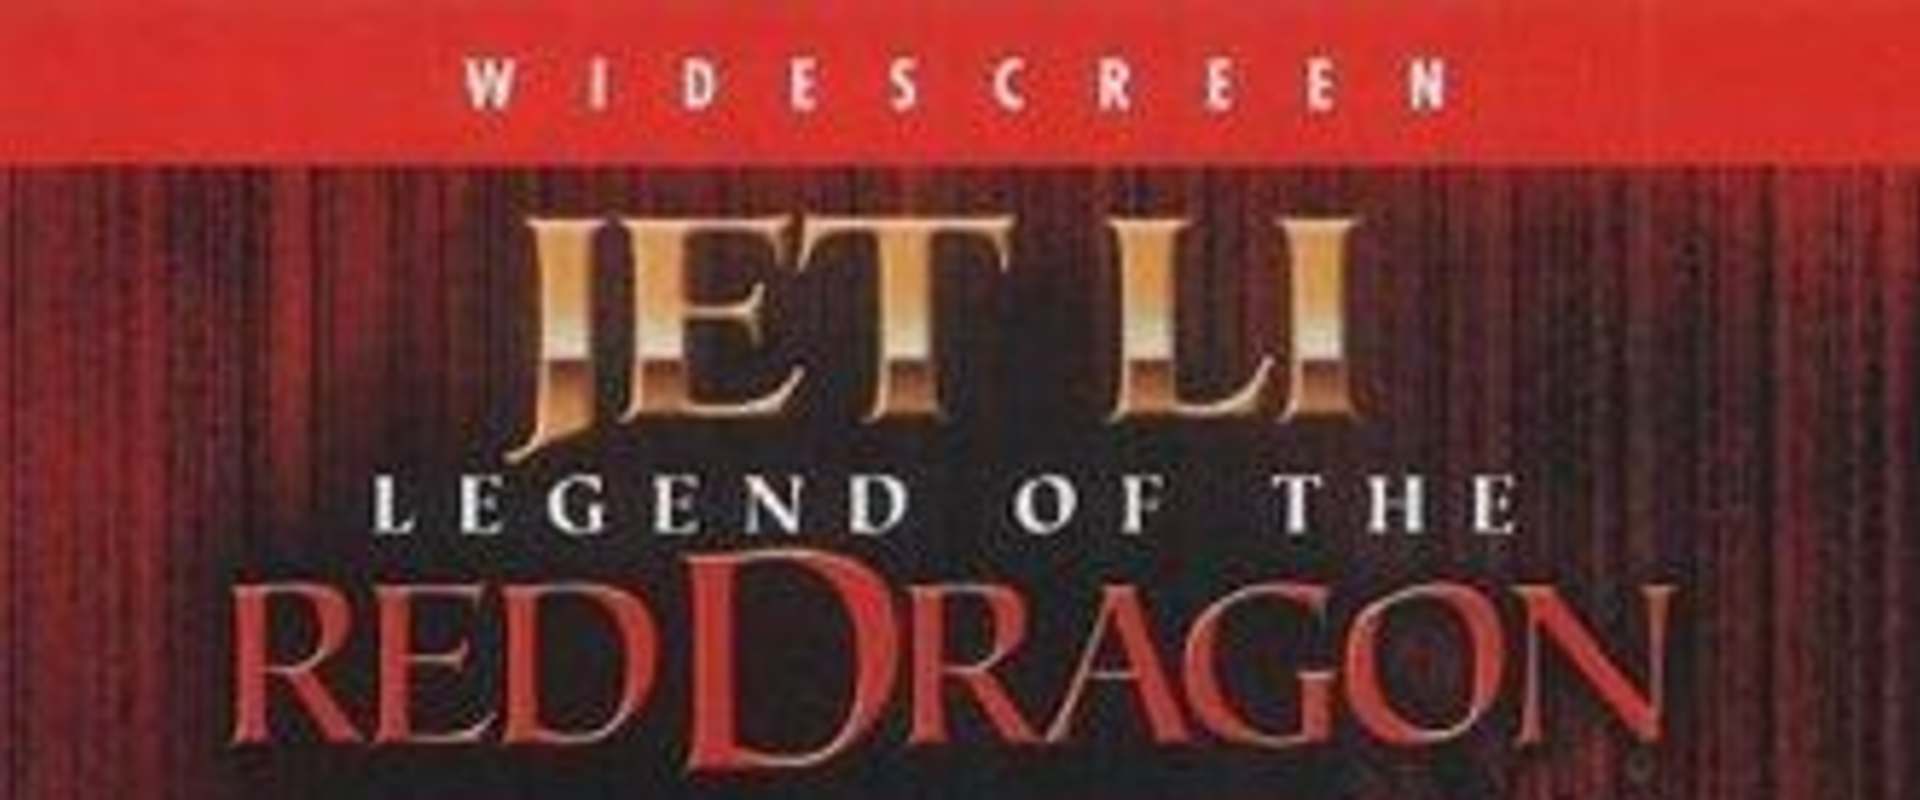 Legend of the Red Dragon background 2